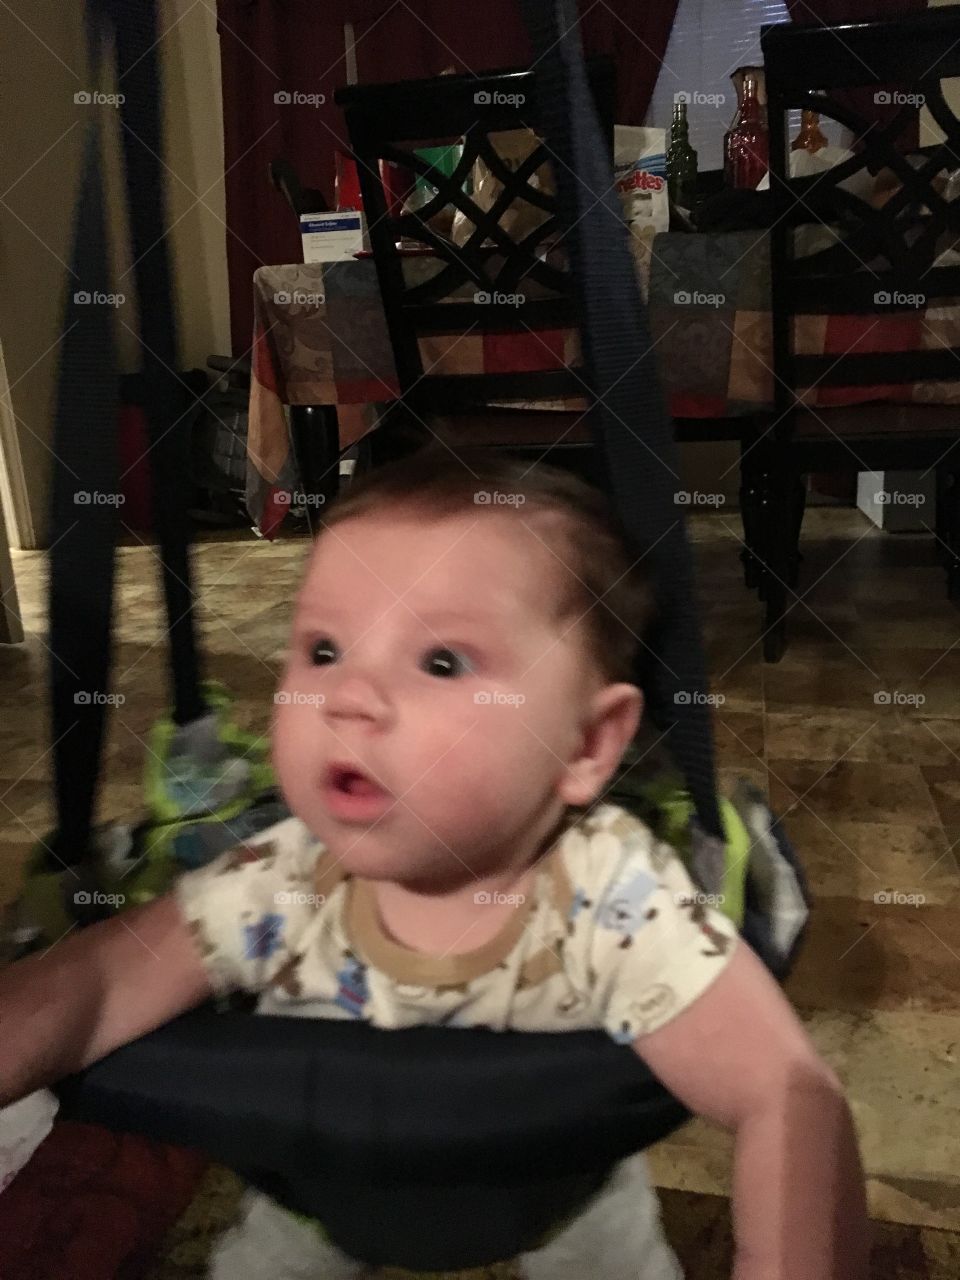 My grandson in his bouncer❤️